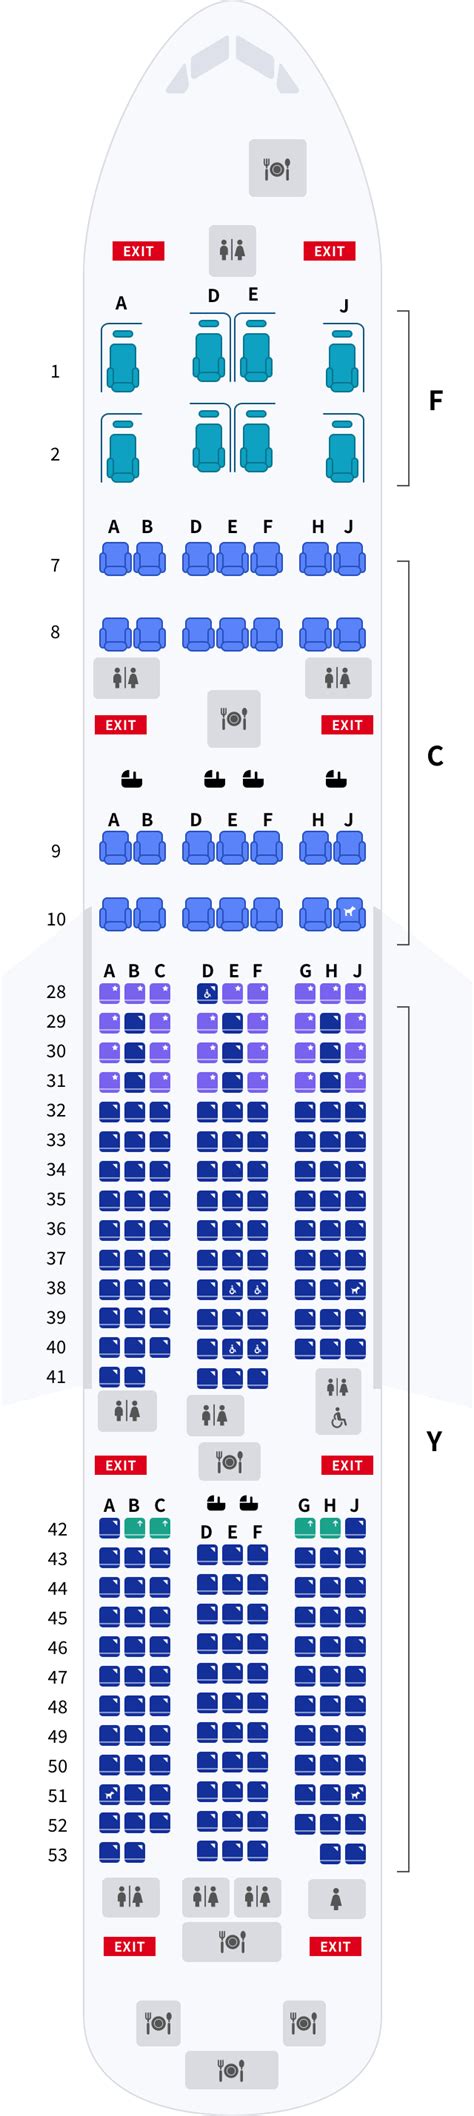 American Airlines Boeing Seating Plan Elcho Table